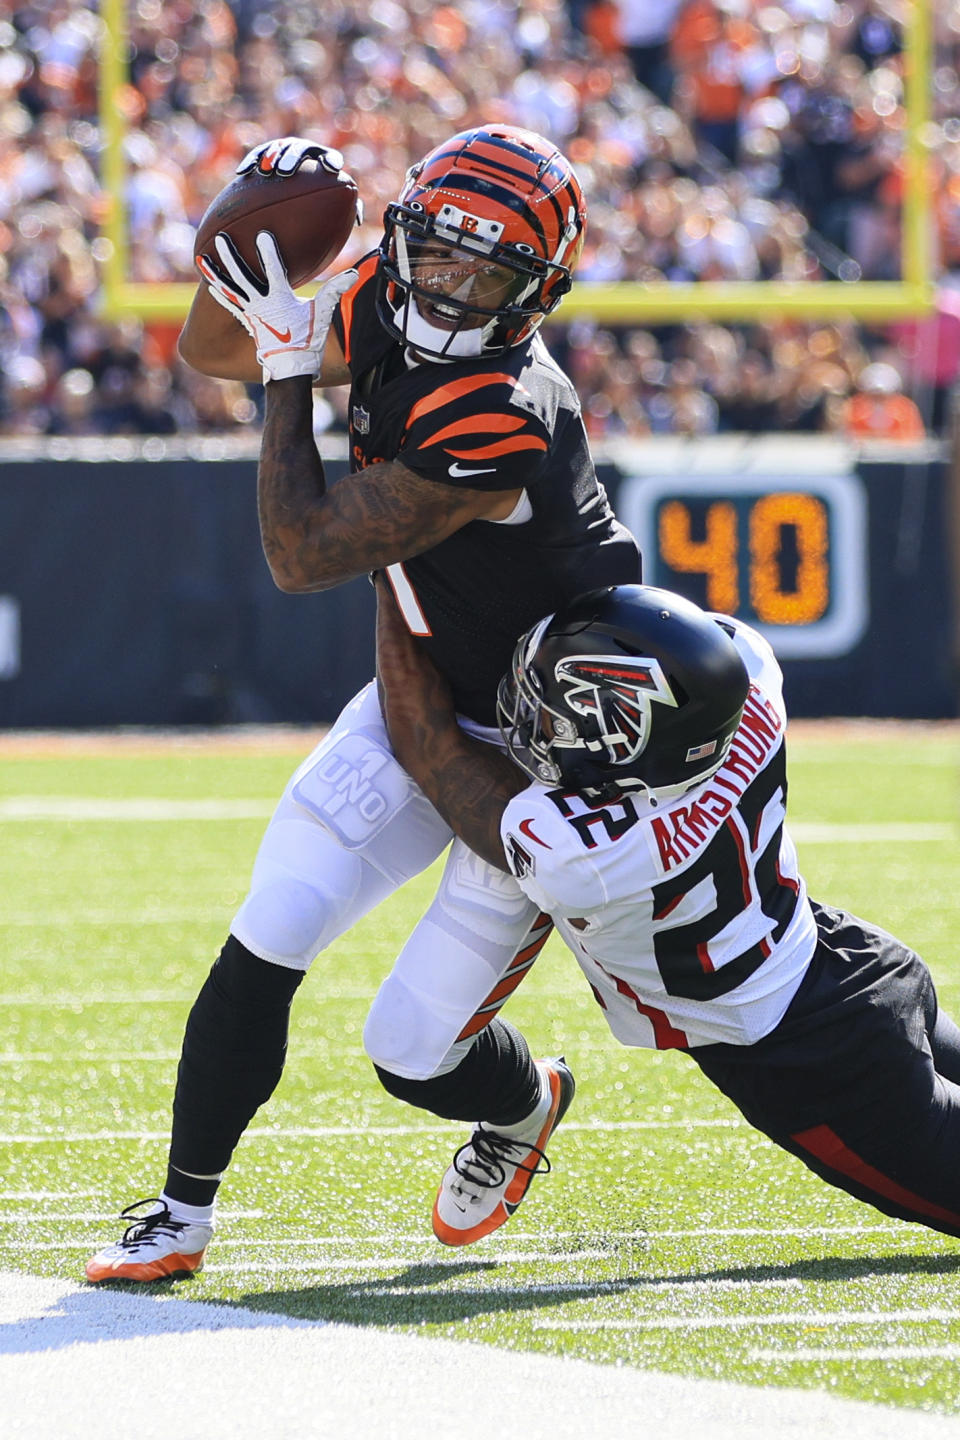 Cincinnati Bengals wide receiver Ja'Marr Chase (1) is tackled by Atlanta Falcons cornerback Cornell Armstrong in the first half of an NFL football game in Cincinnati, Sunday, Oct. 23, 2022. (AP Photo/Aaron Doster)